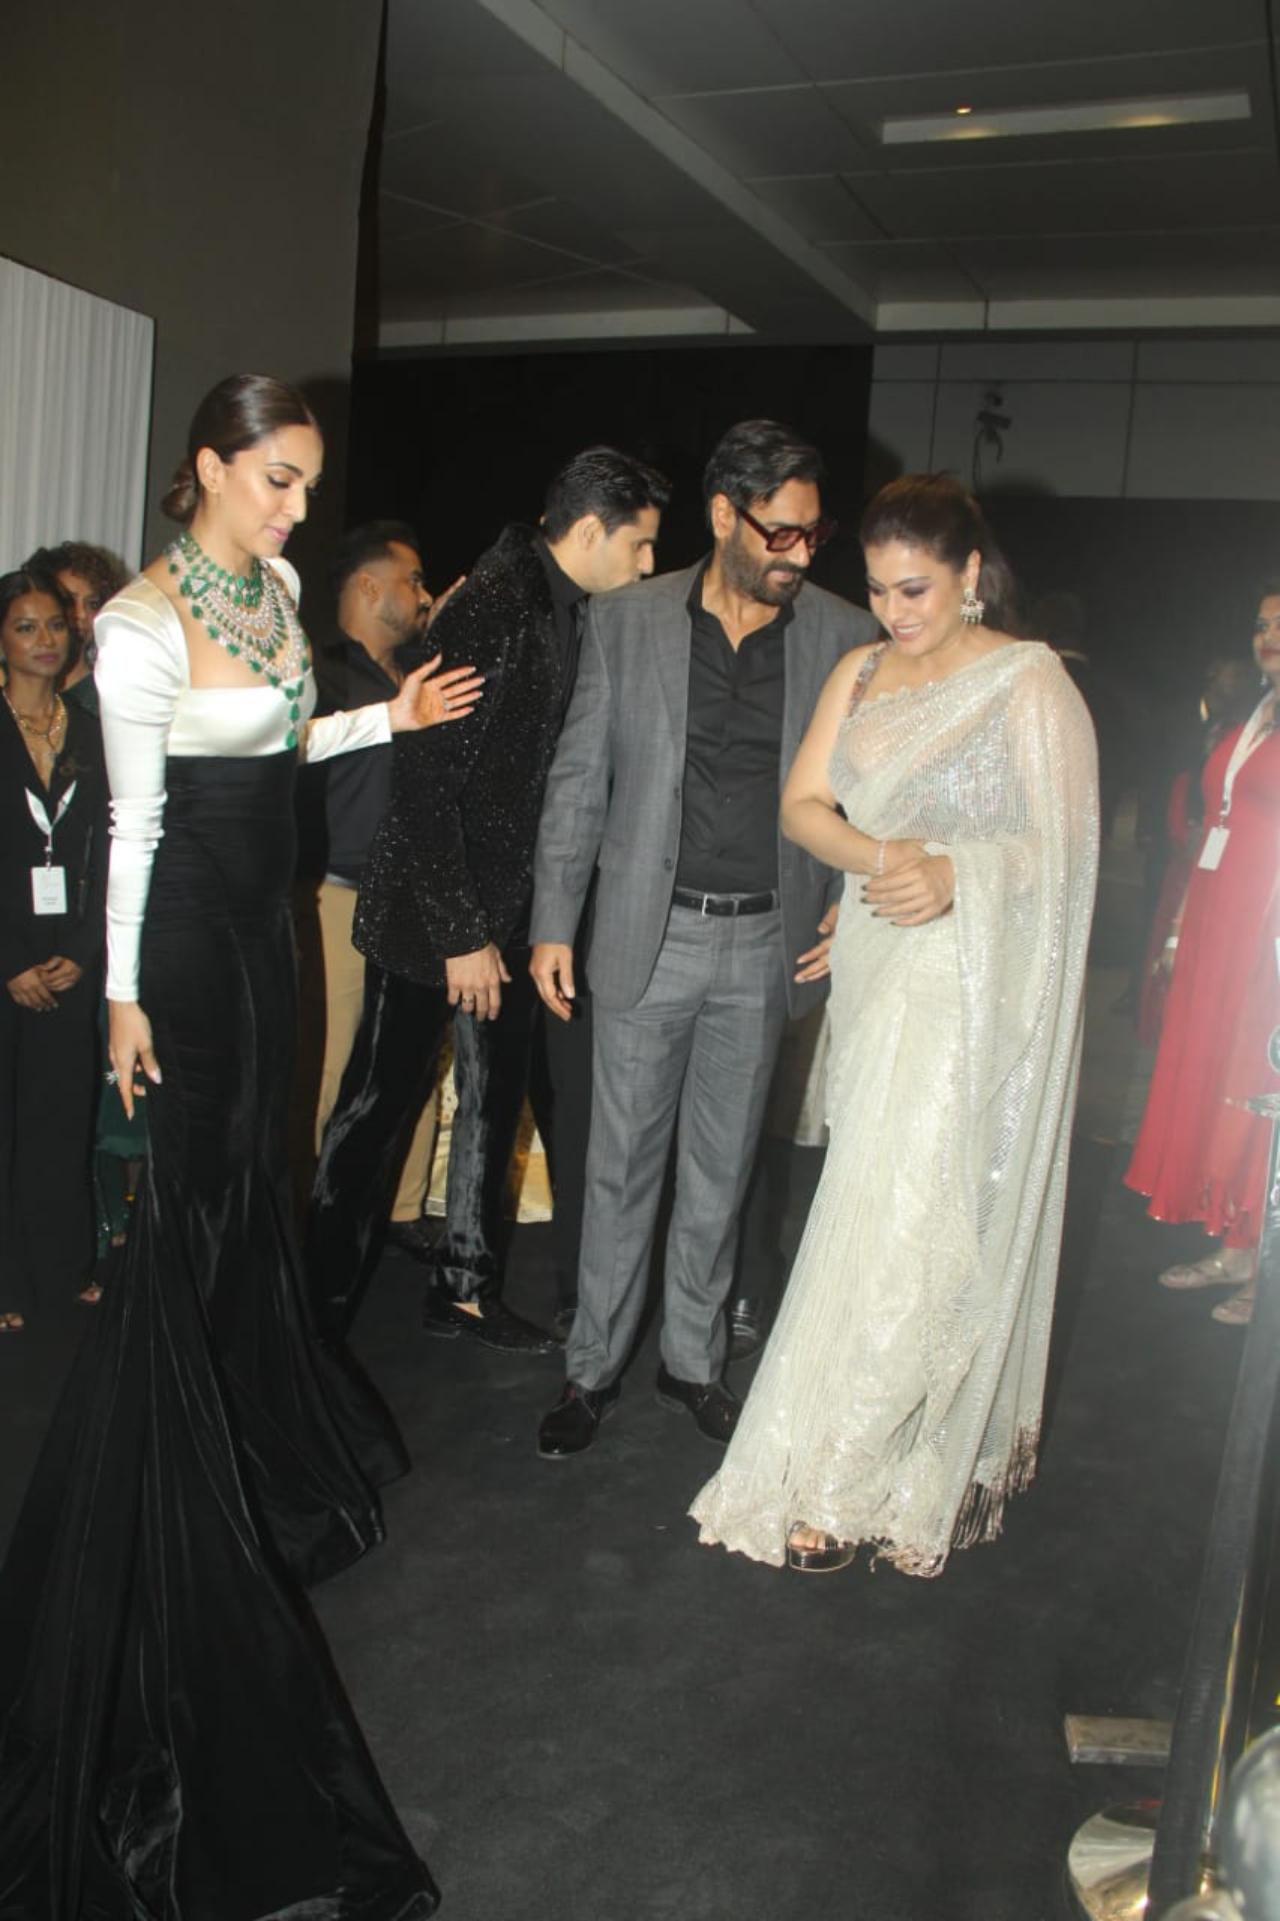 Kajol and Ajay Devgn arrived together for the party and were greeted by the newlyweds